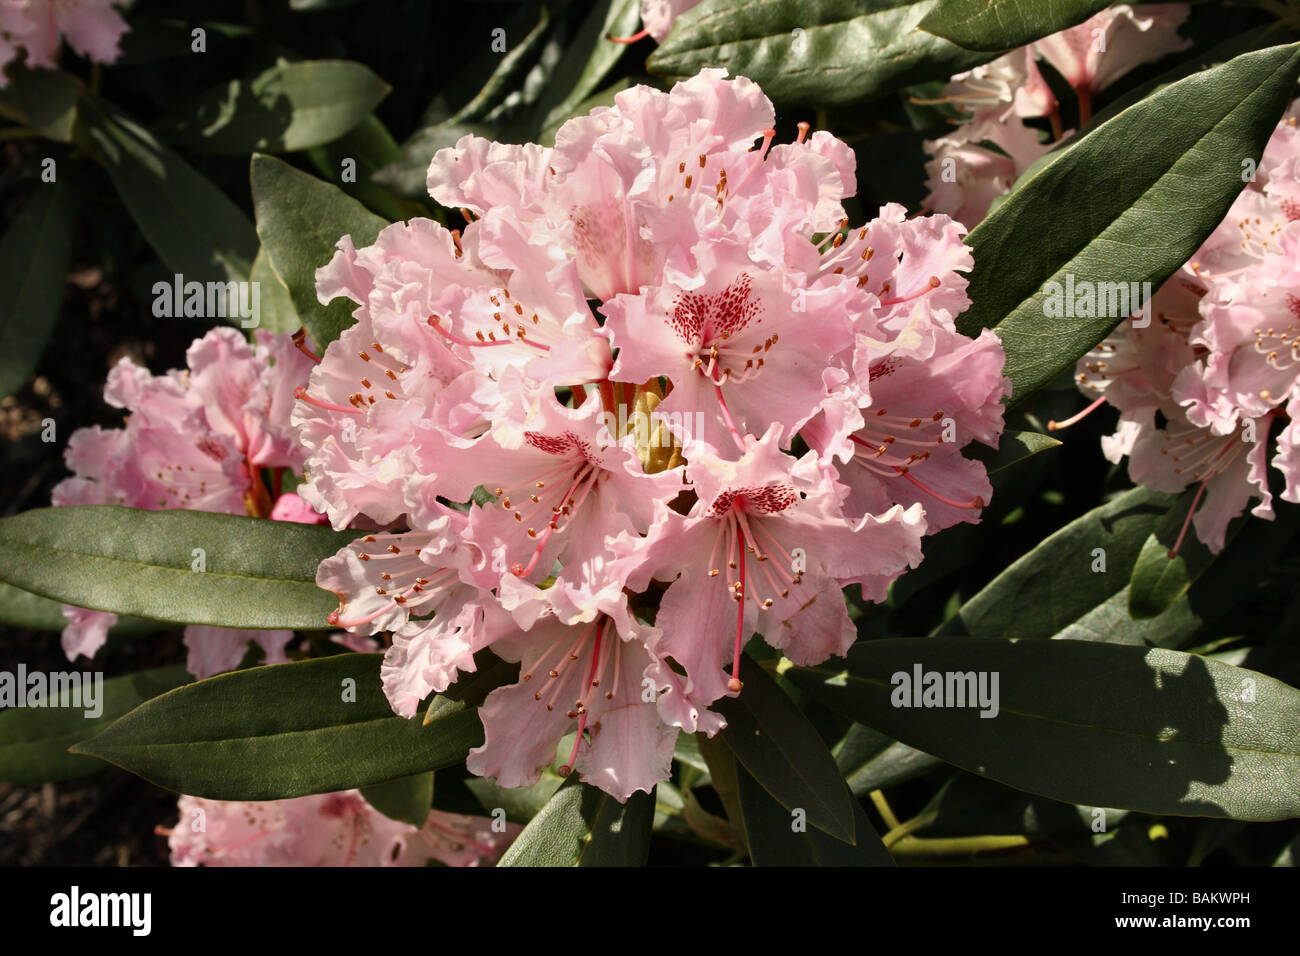 Rhododendron Flower in Bloom Family Ericaceae showing flower detail and components Stock Photo